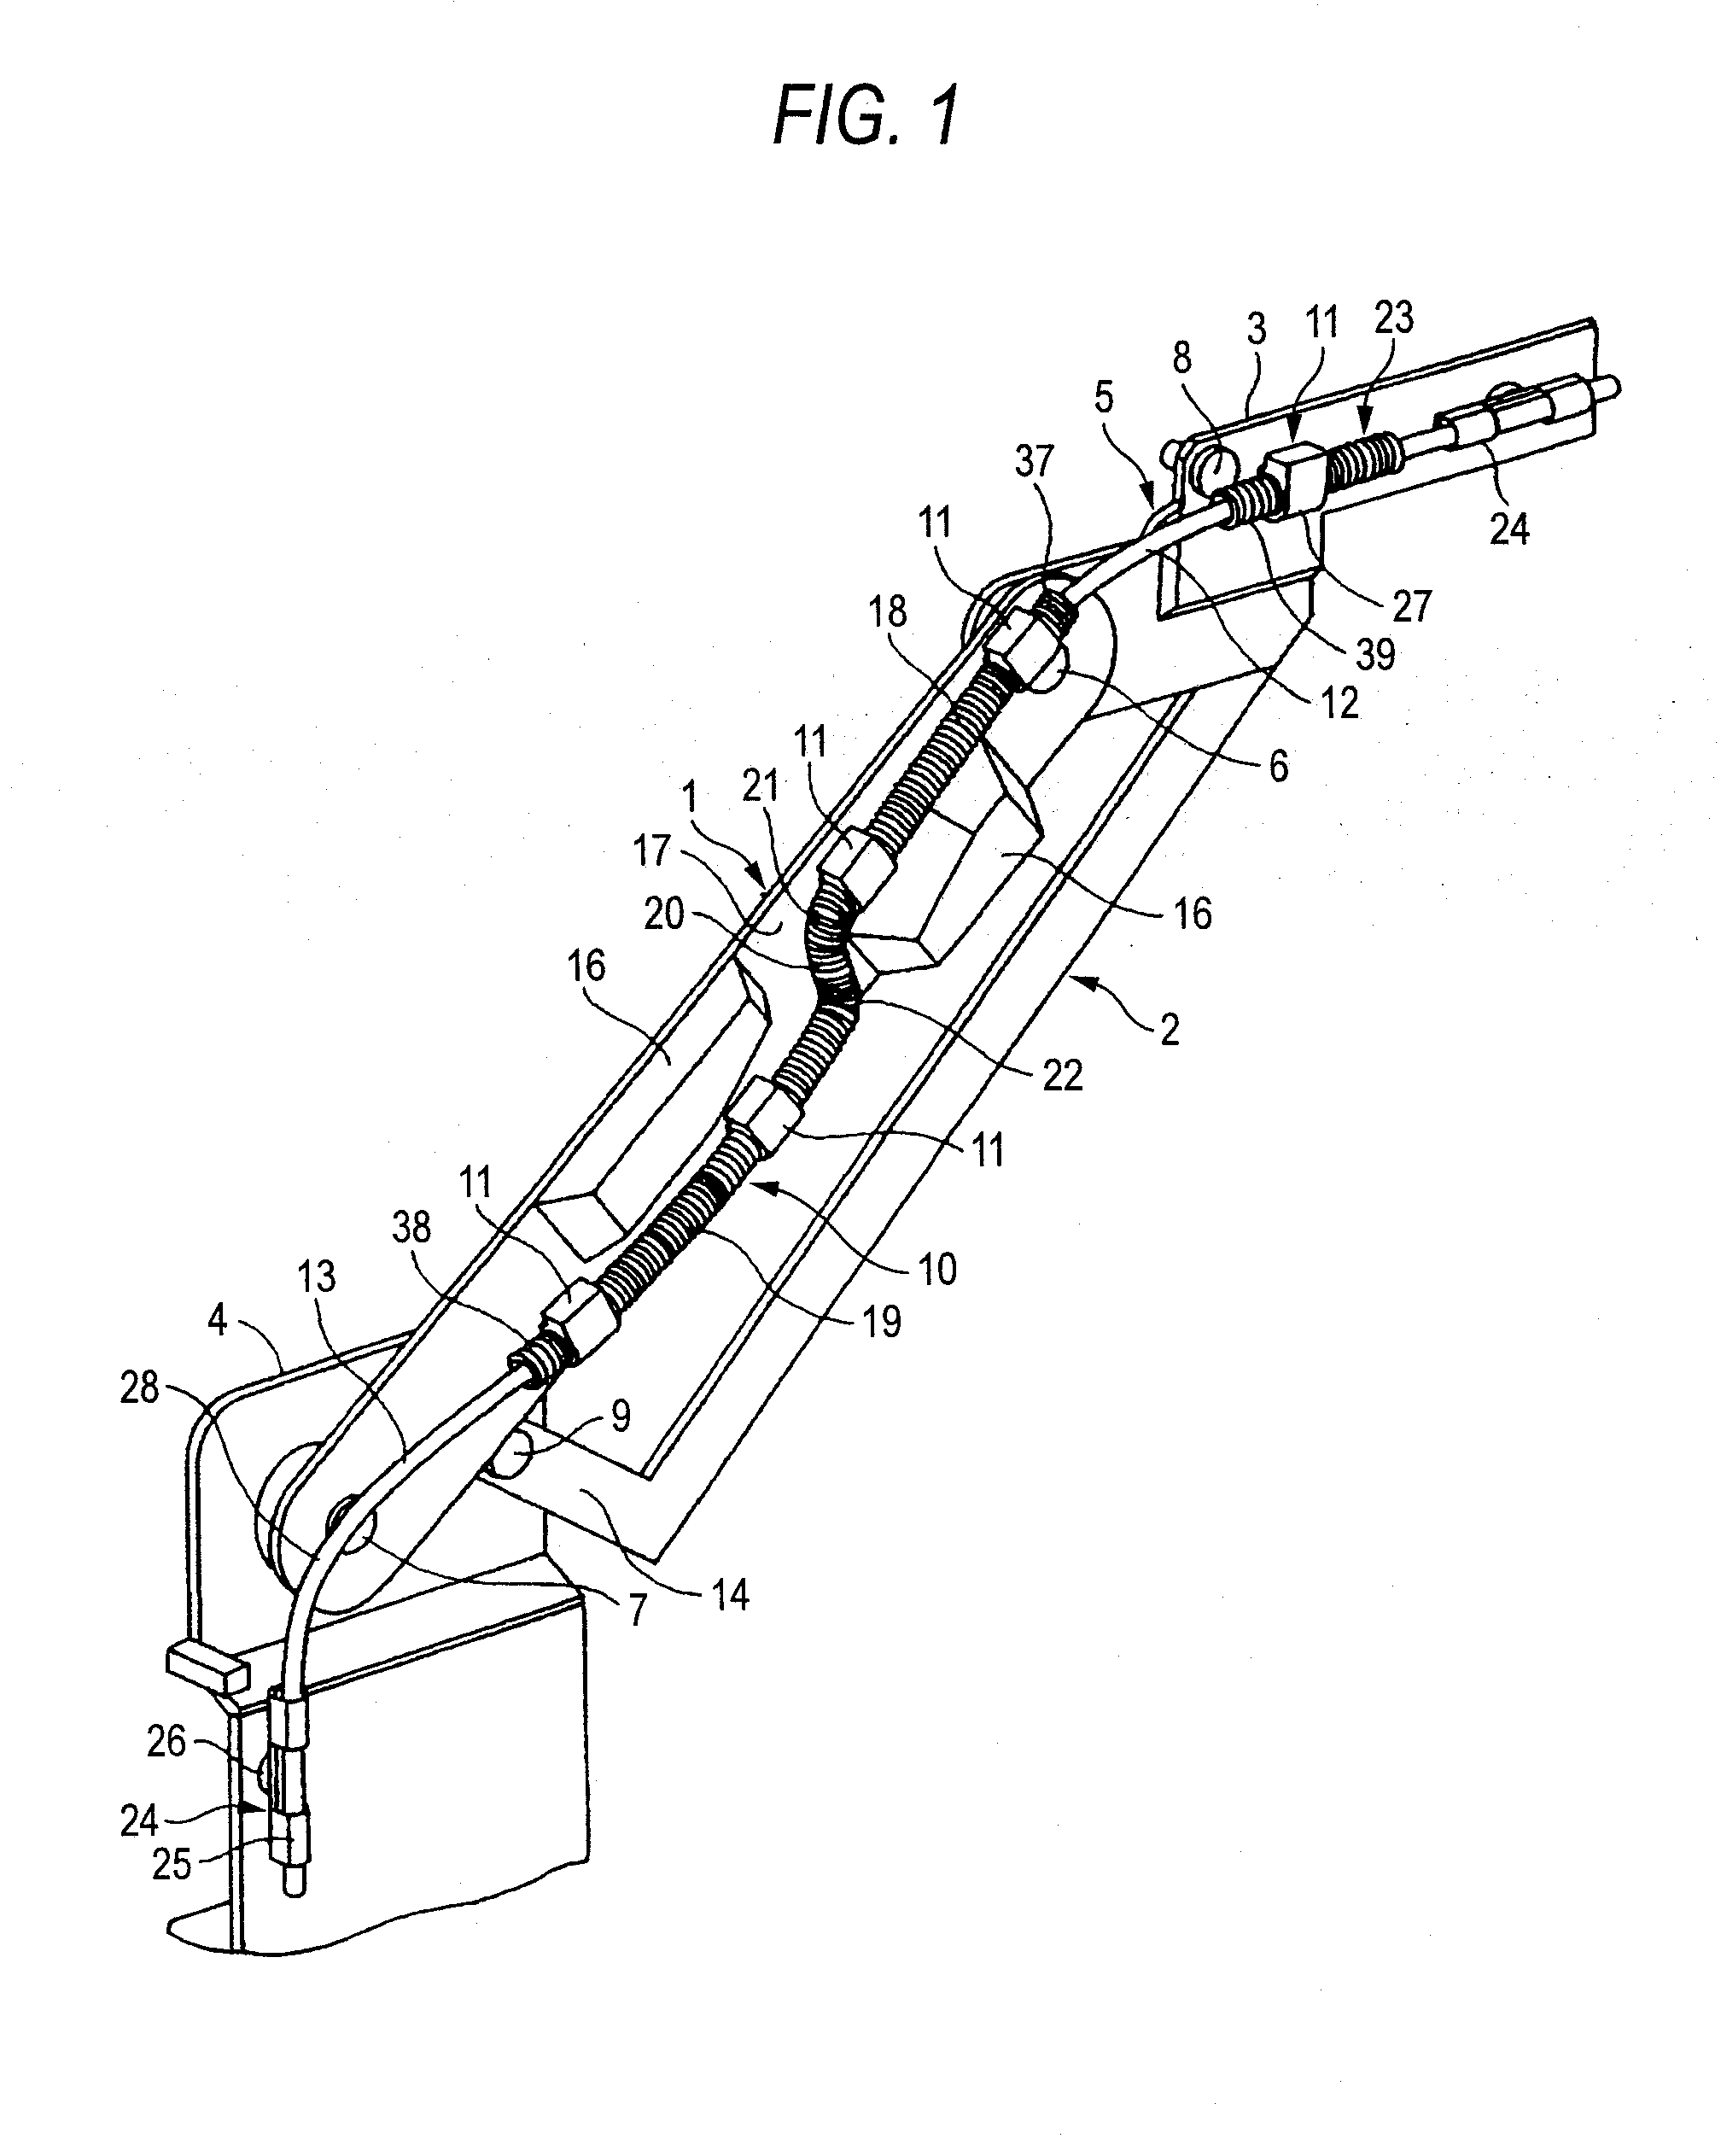 Installing structure of wire harness